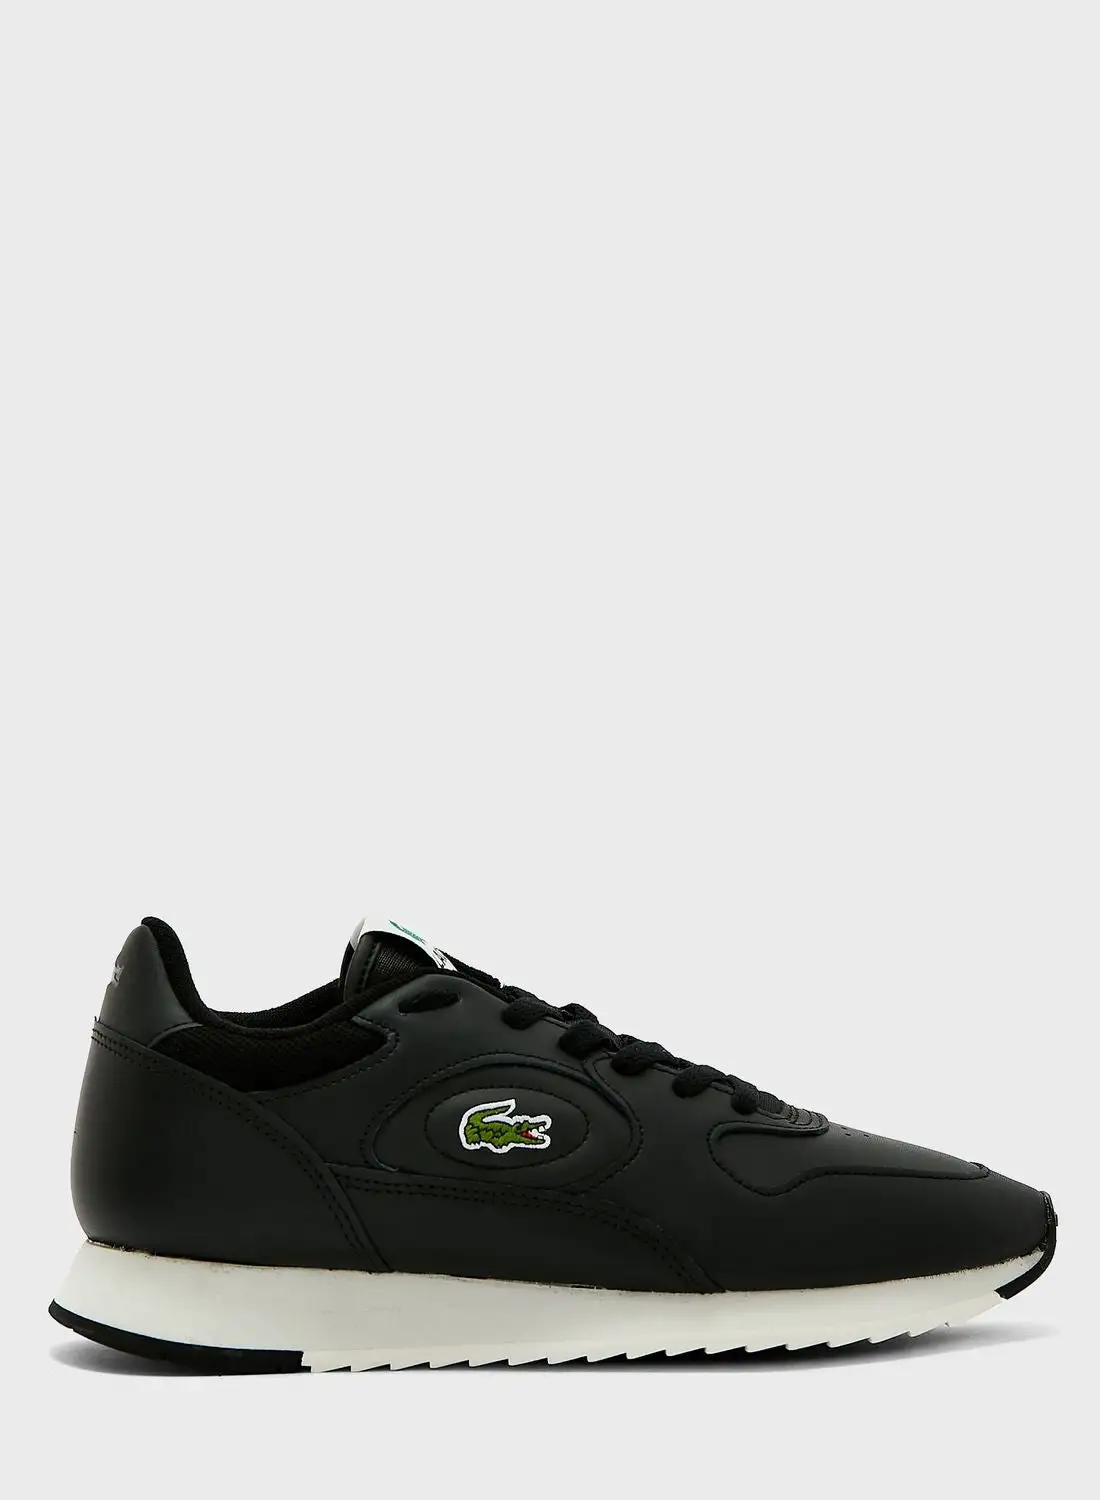 LACOSTE Athleisure Low Top Sneakers